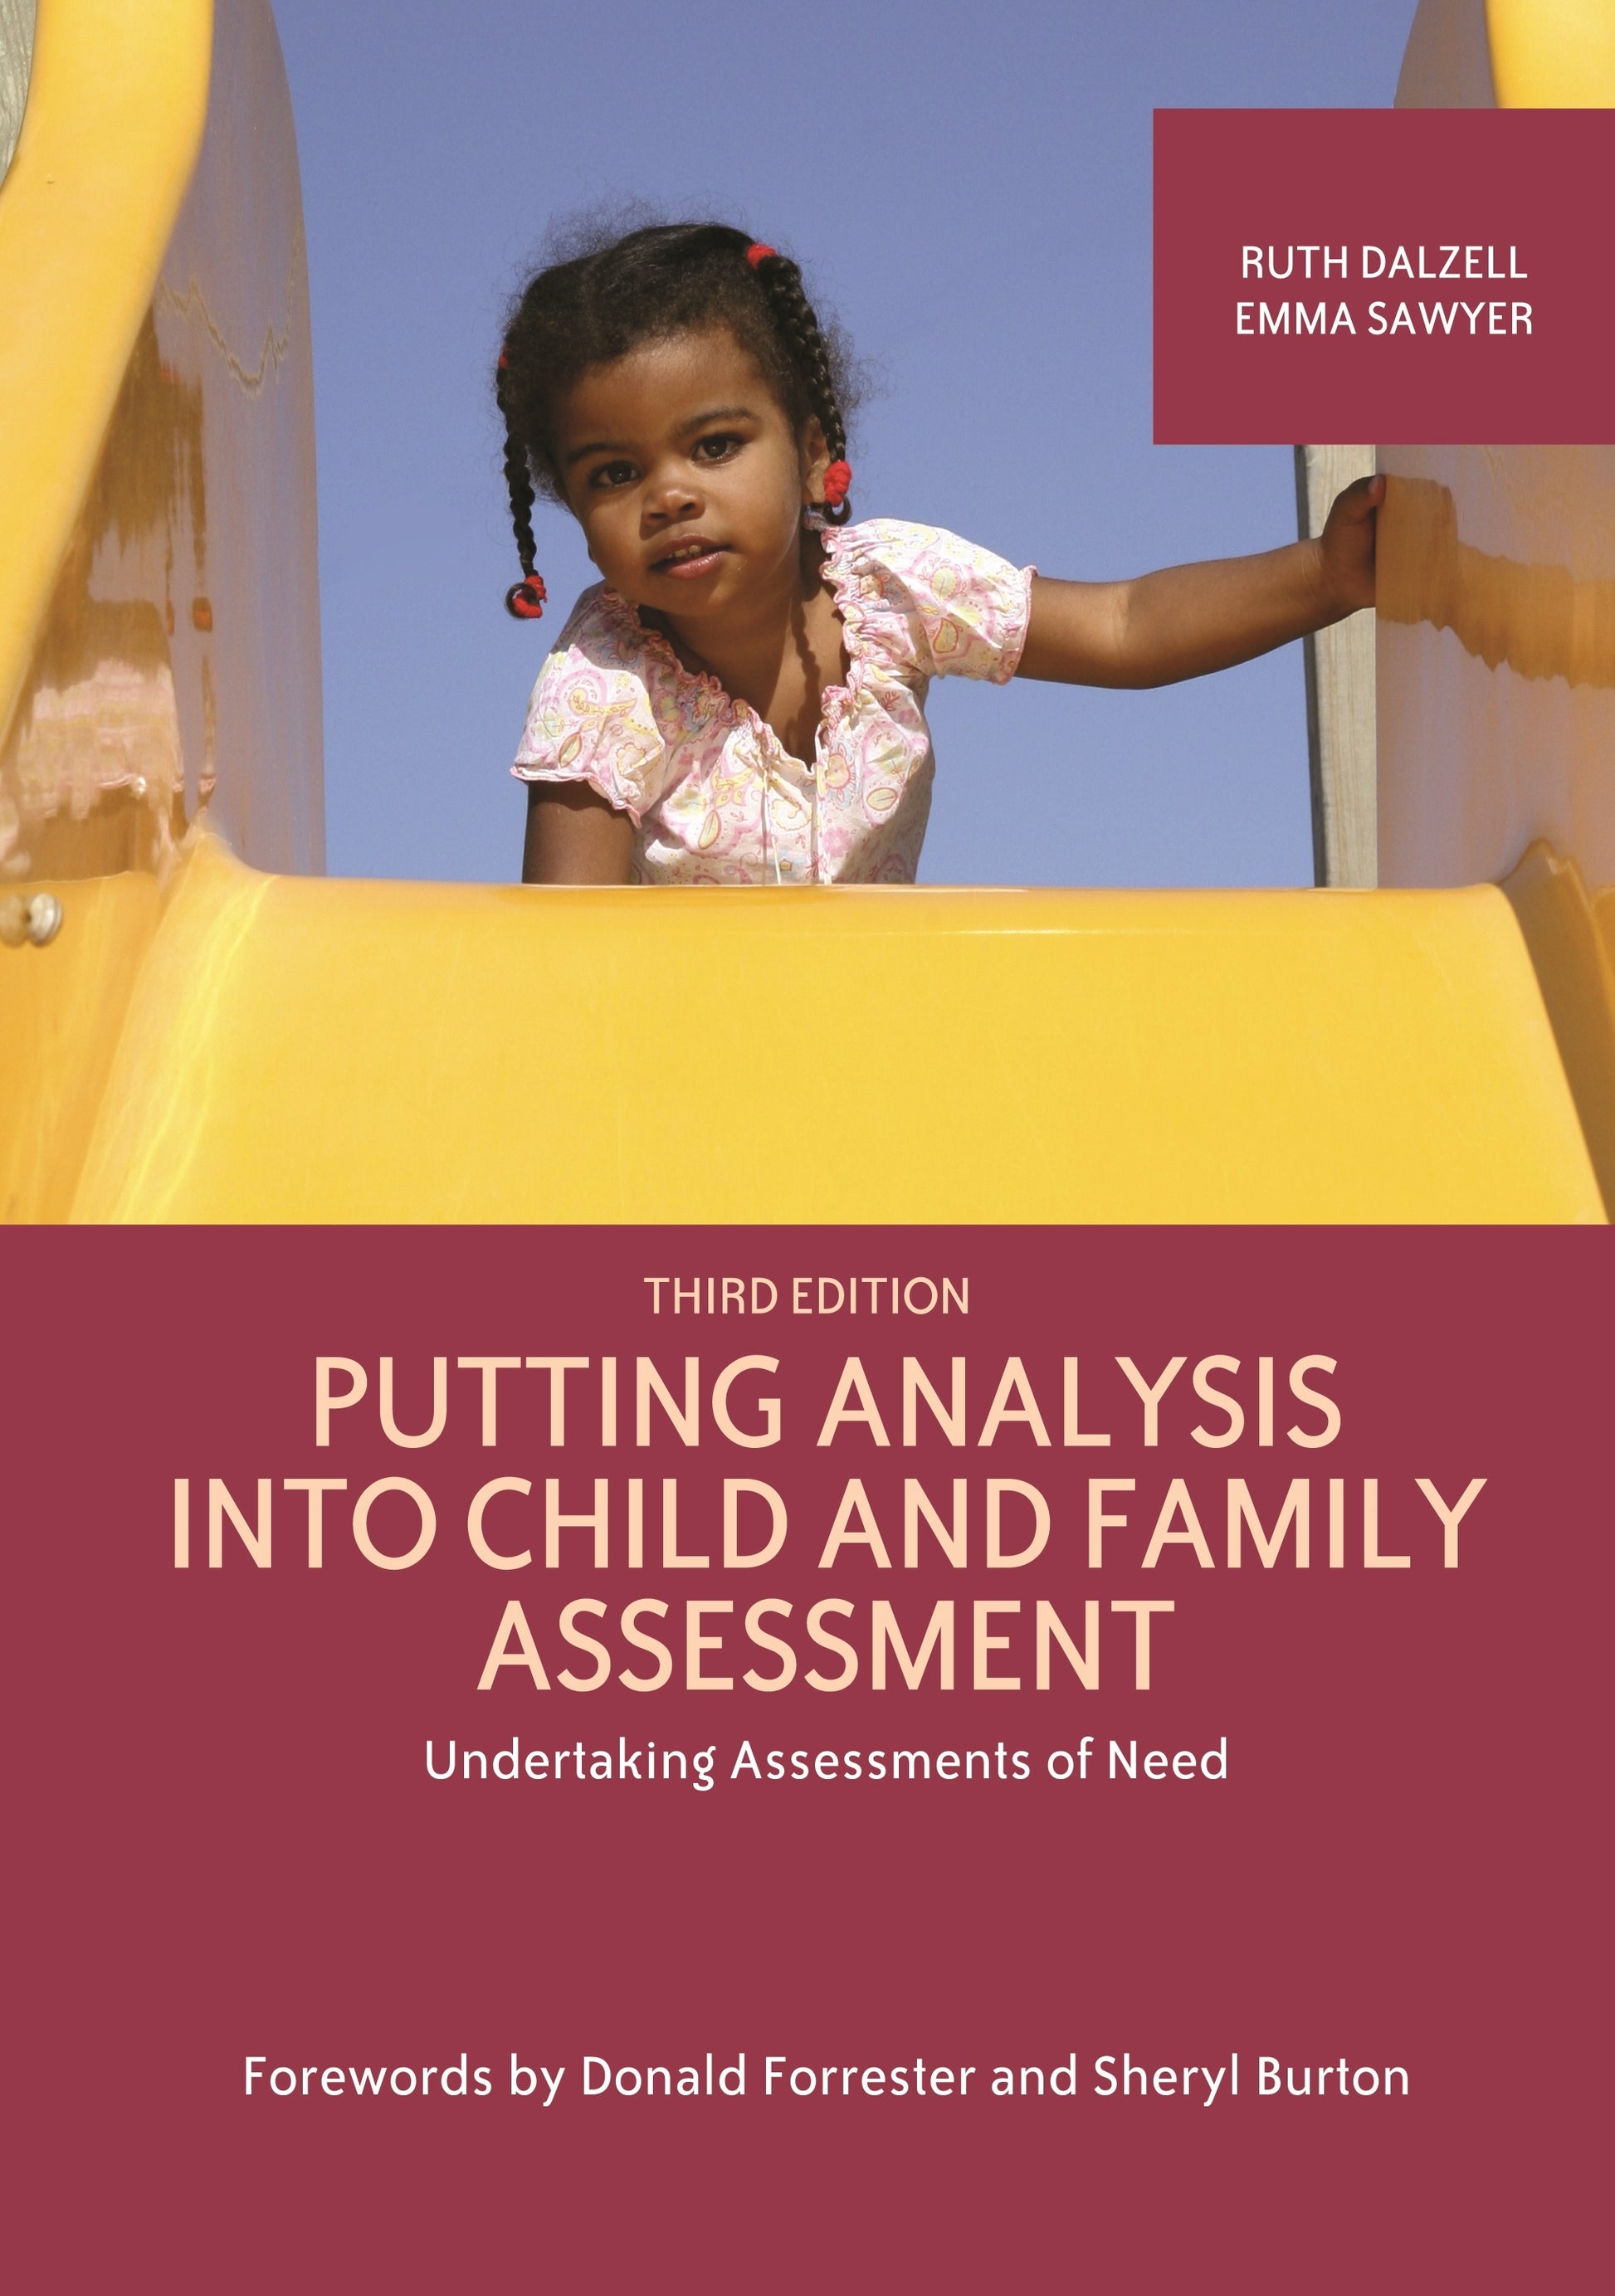 Putting Analysis Into Child and Family Assessment, Third Edition by Donald Forrester, Sheryl Burton, Emma Sawyer, Ruth Dalzell